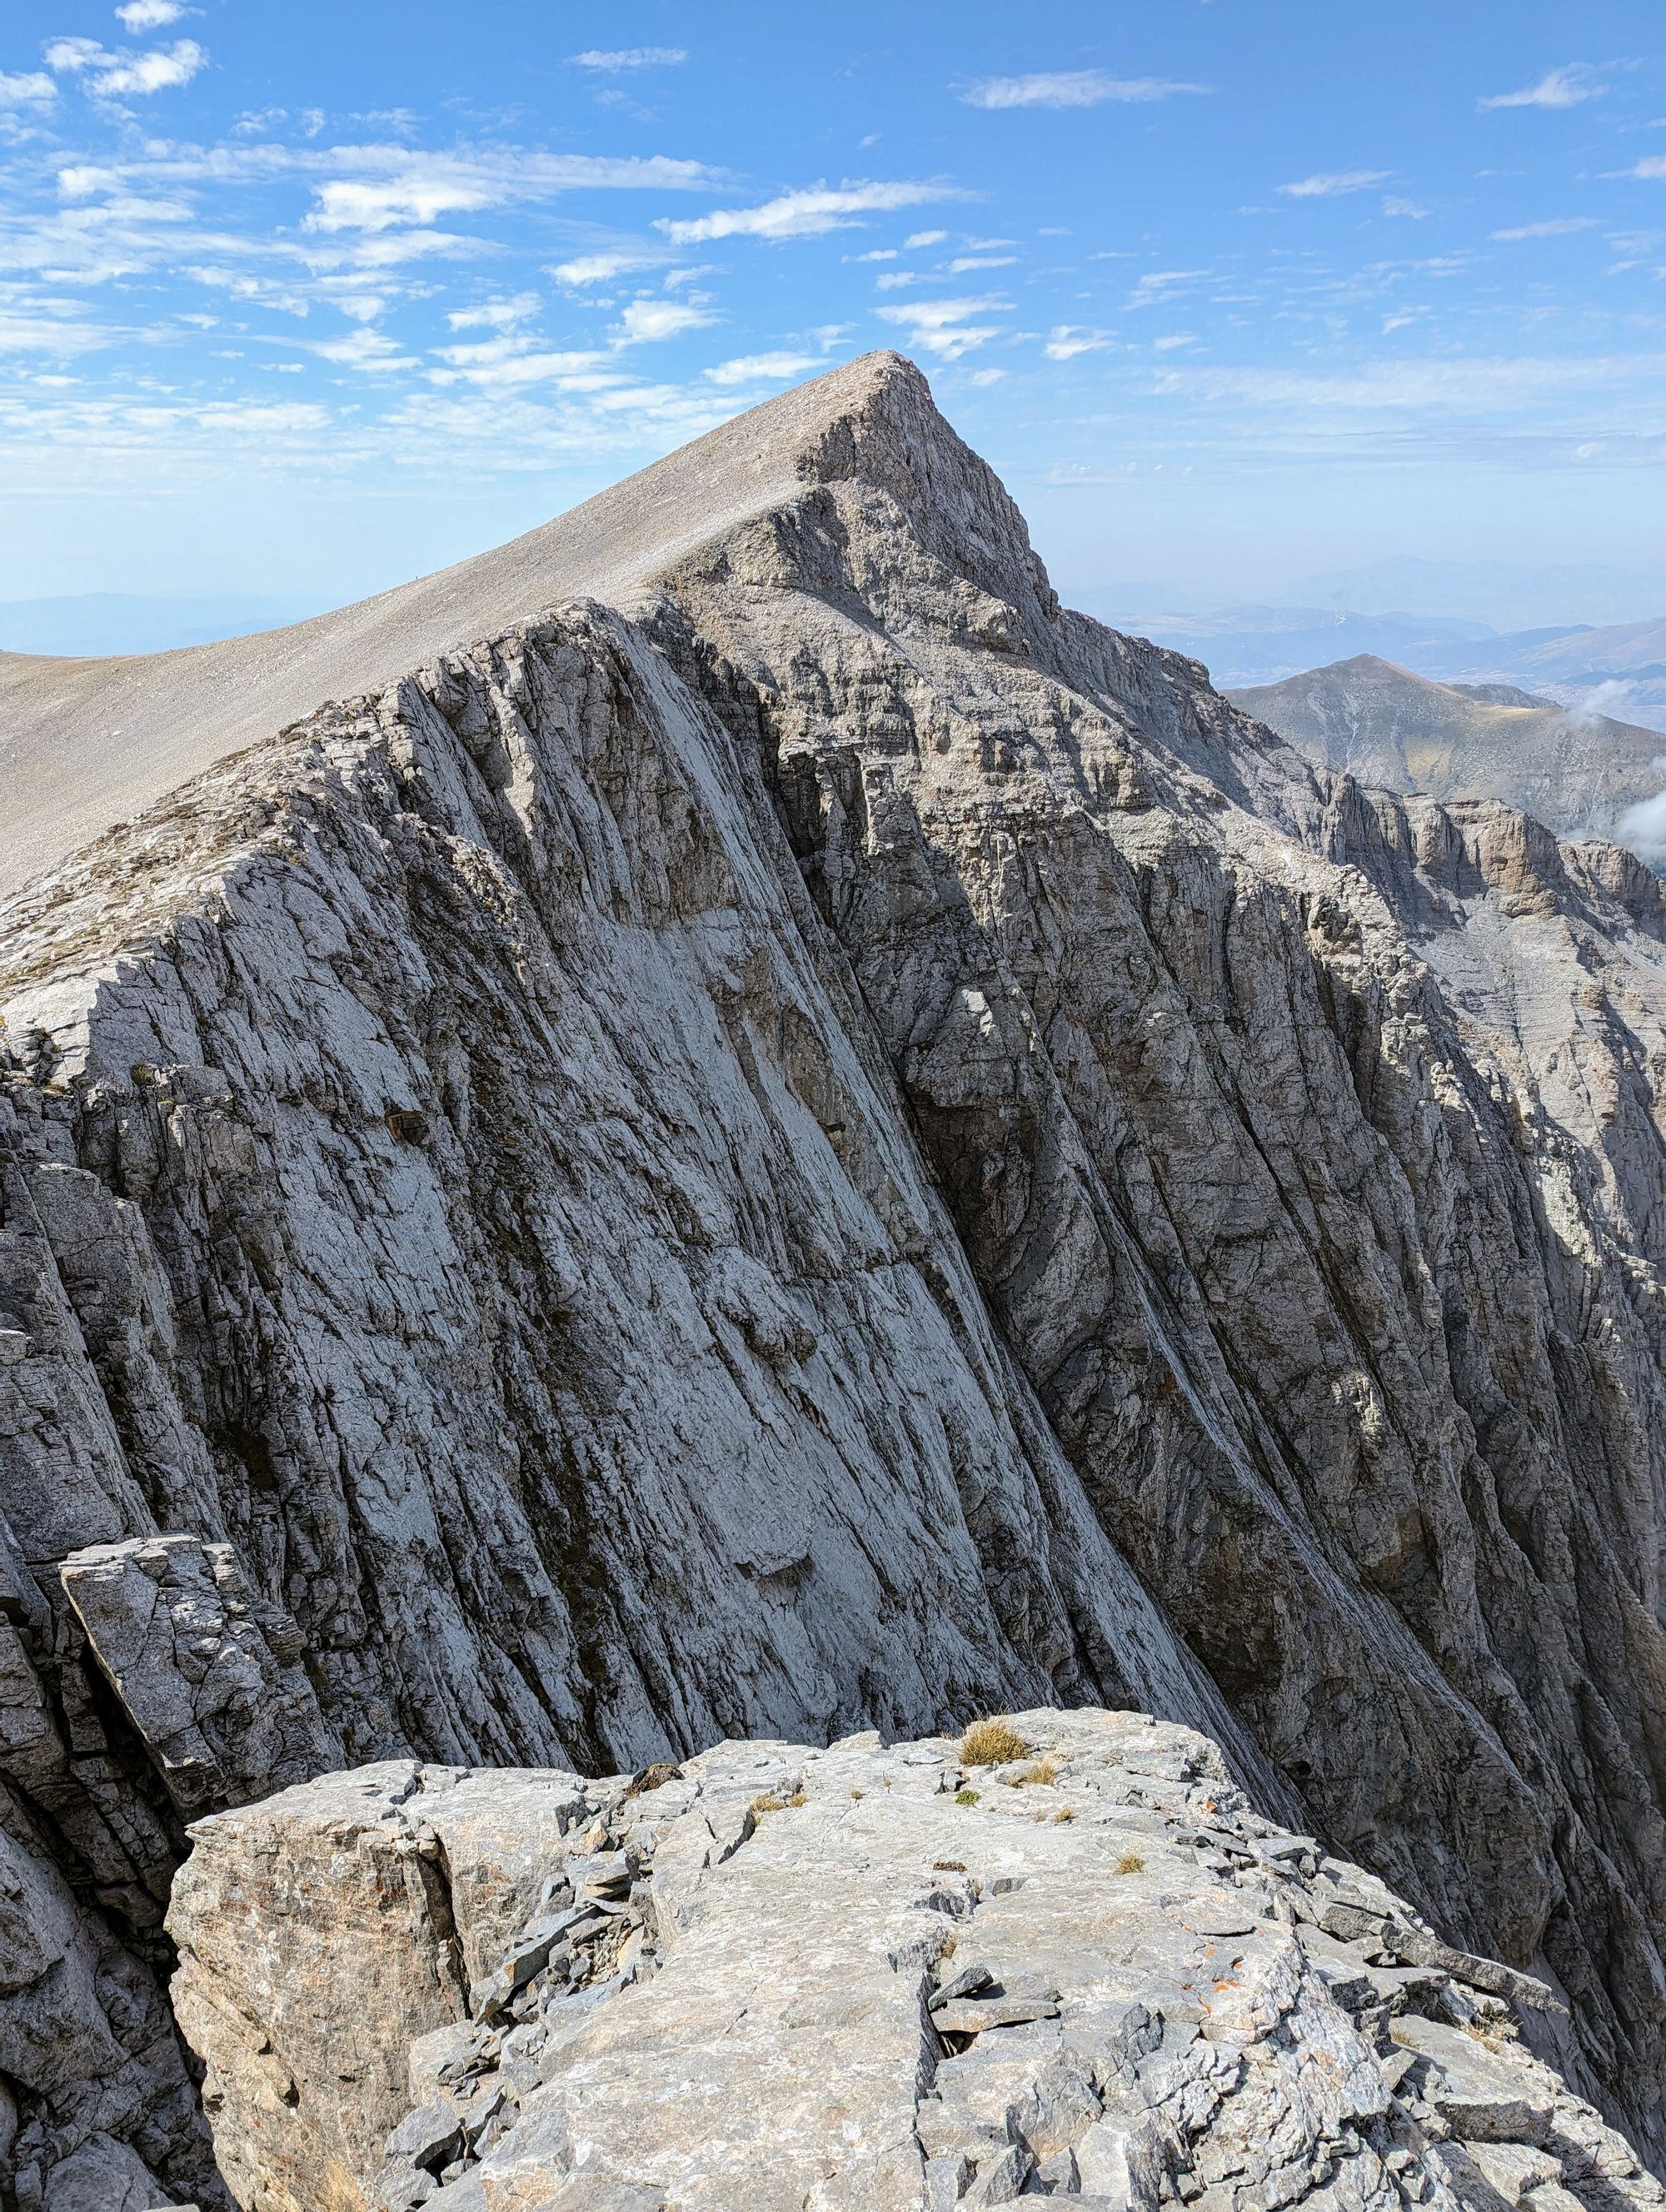 A Day Hike from Prionia to Mytikas Peak - The Summit of Mount Olympus